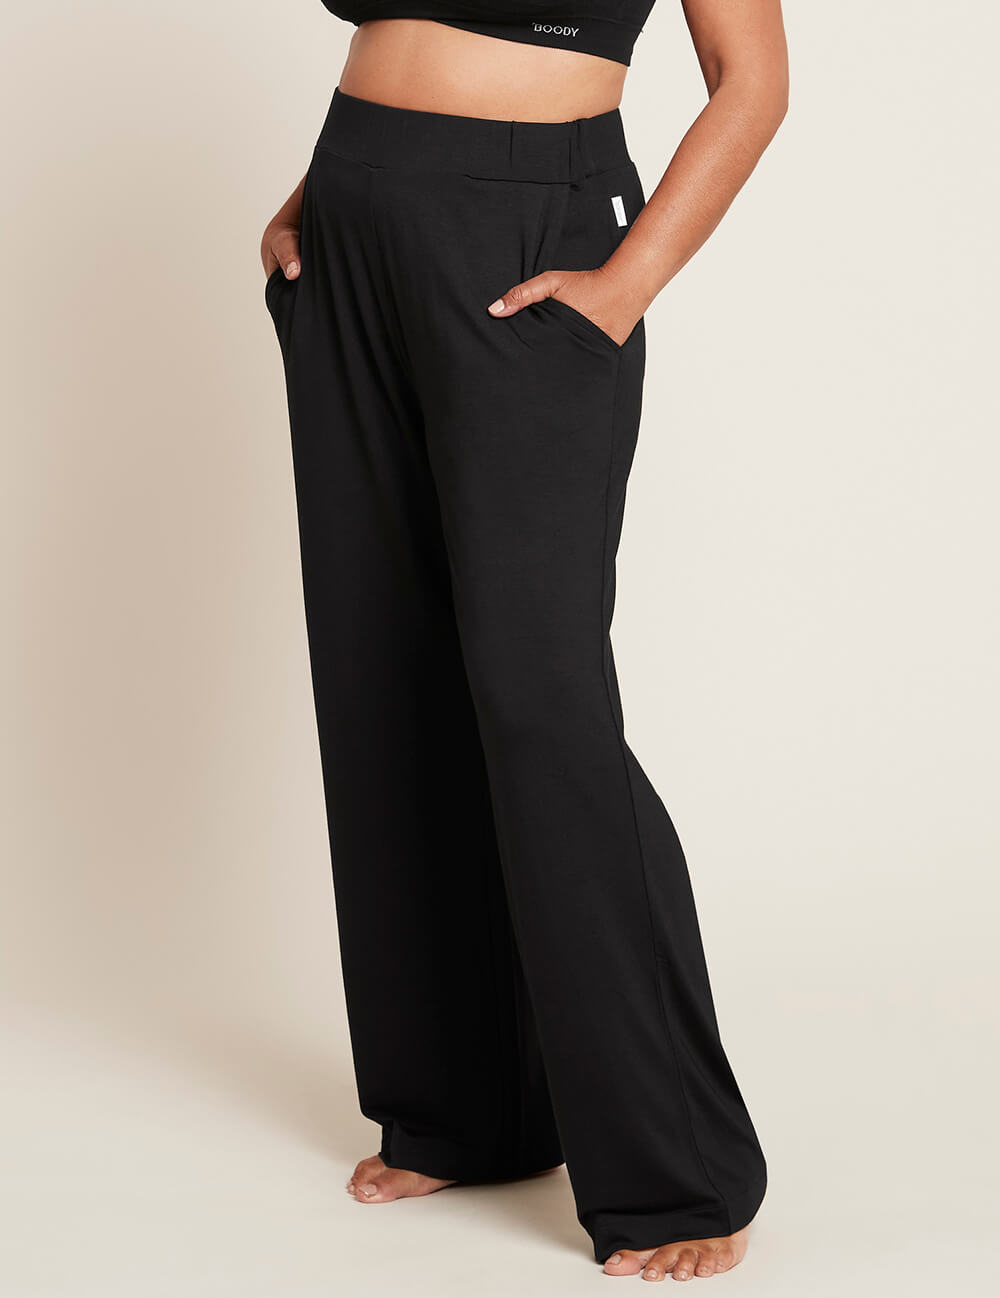 Boody Women's Downtime Wide Leg Lounge Pant in Black Side